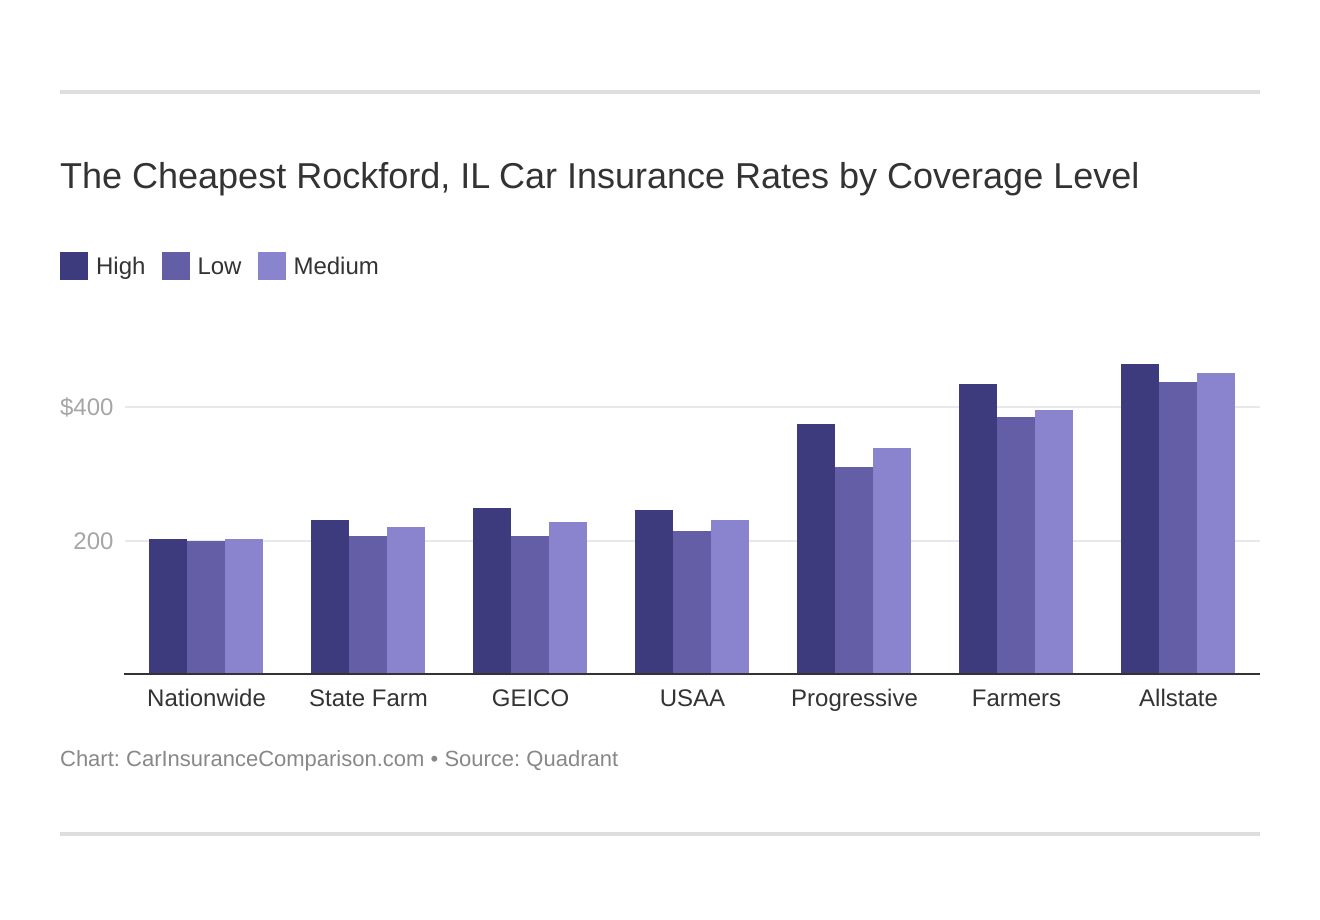 The Cheapest Rockford, IL Car Insurance Rates by Coverage Level